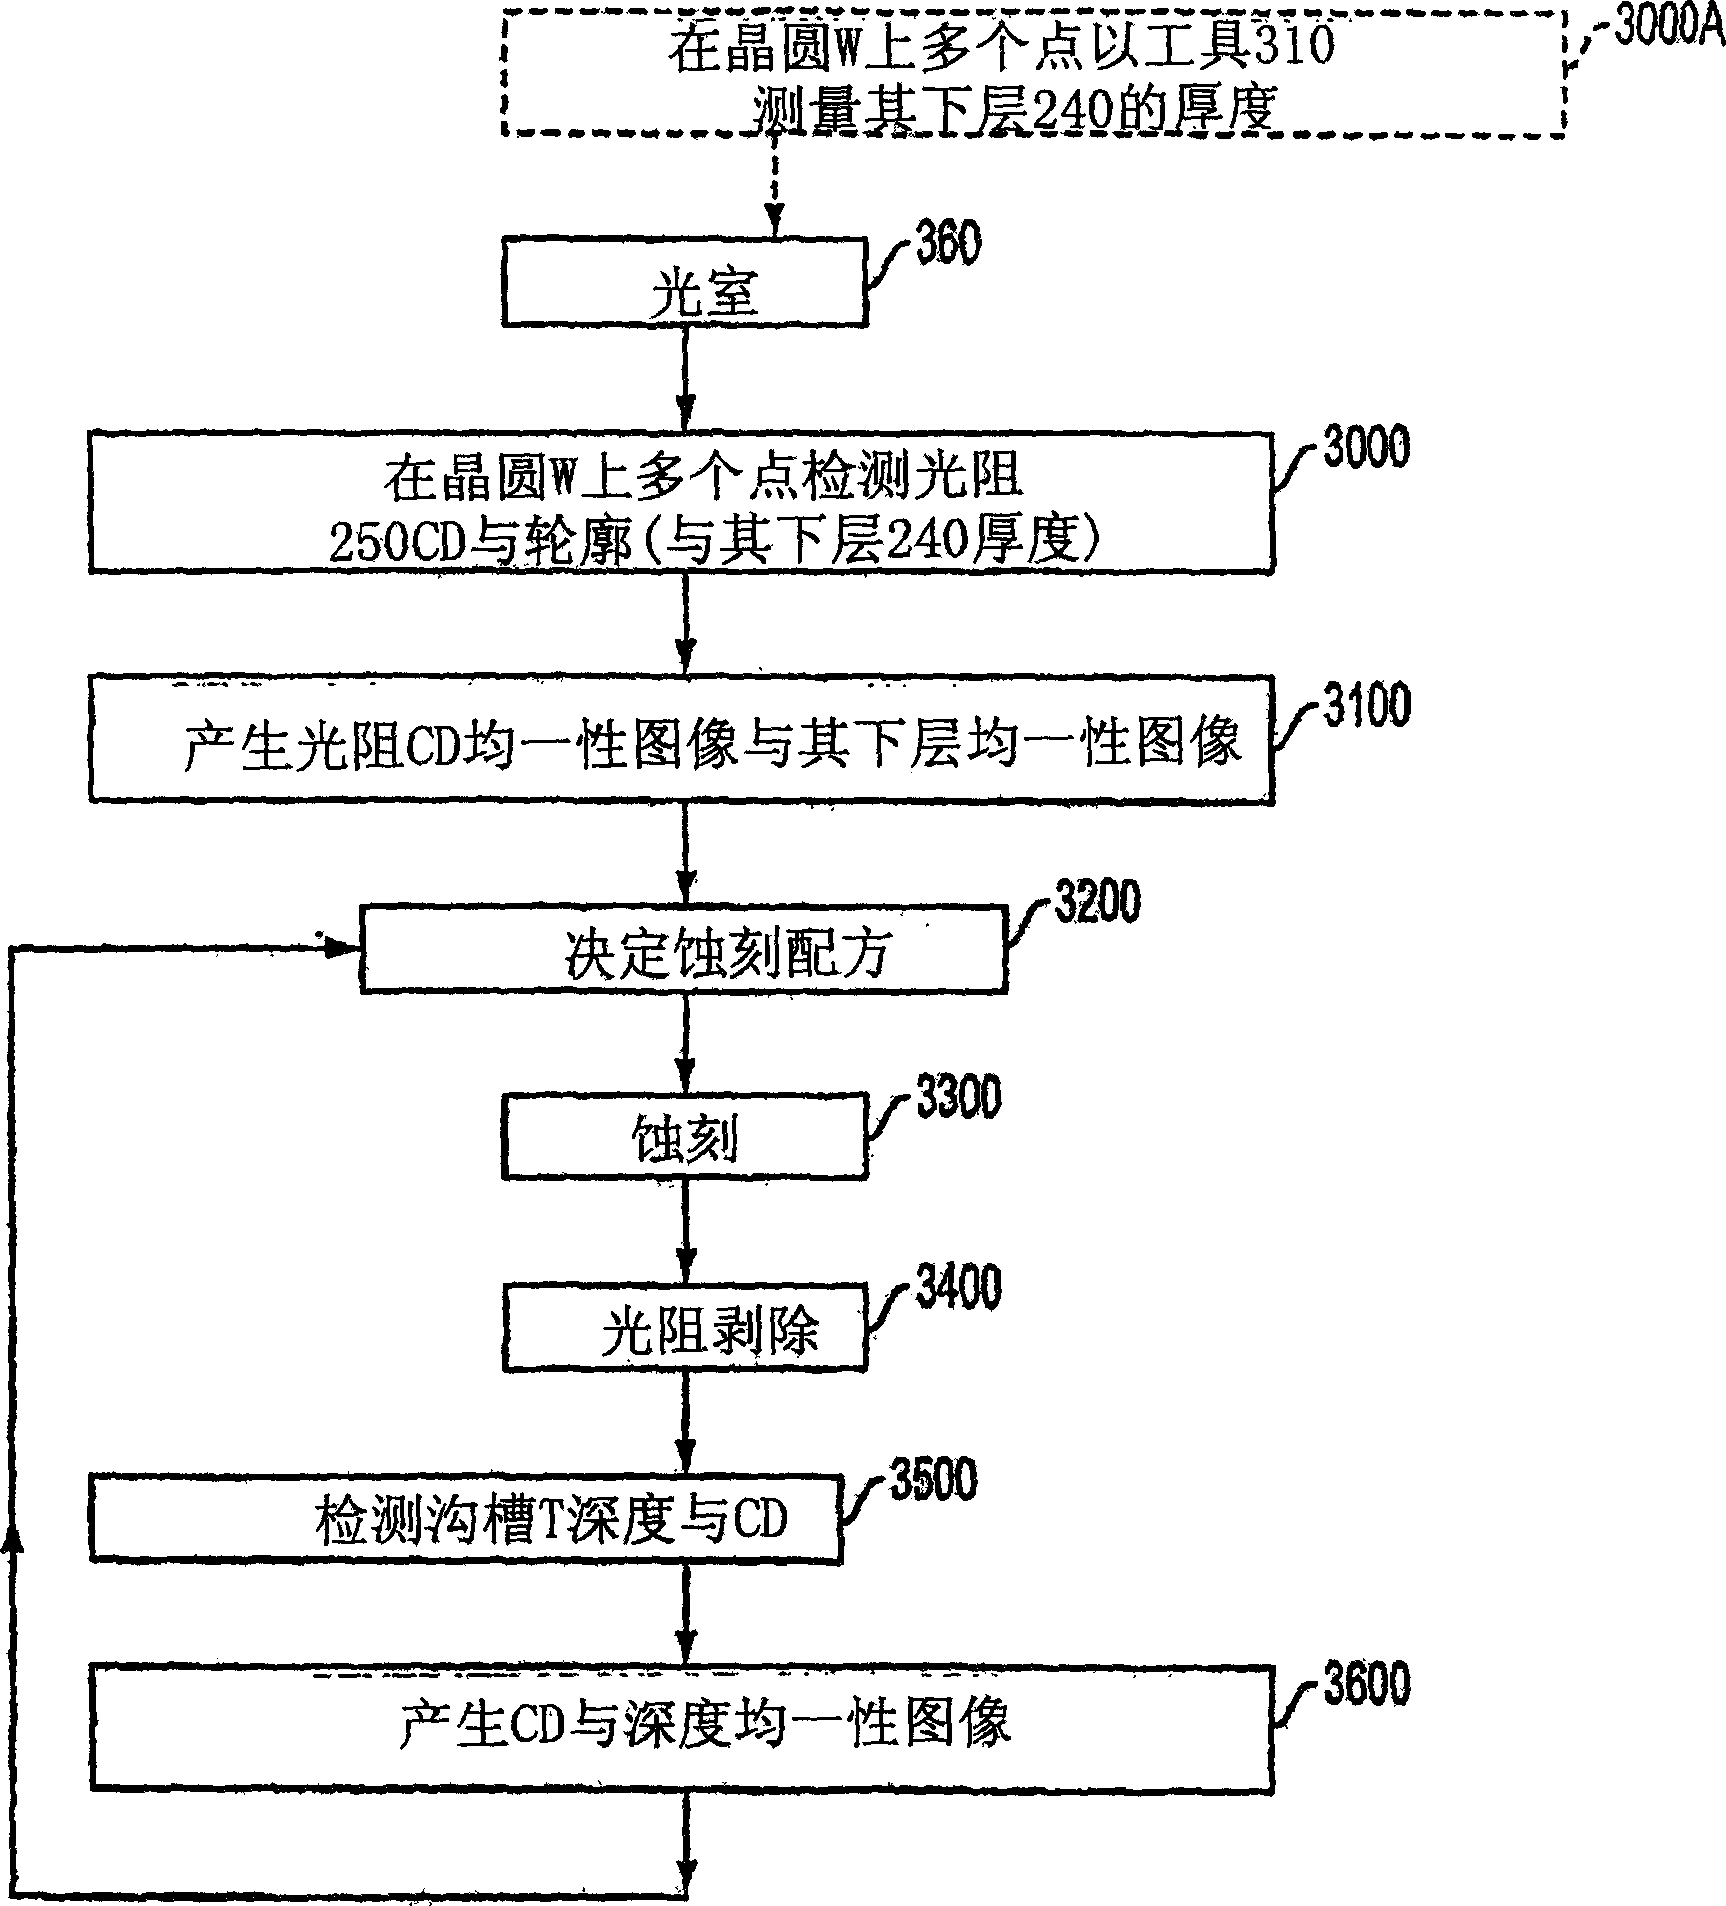 Method and apparatus employing integrated metrology for improved dielectric etch efficiency